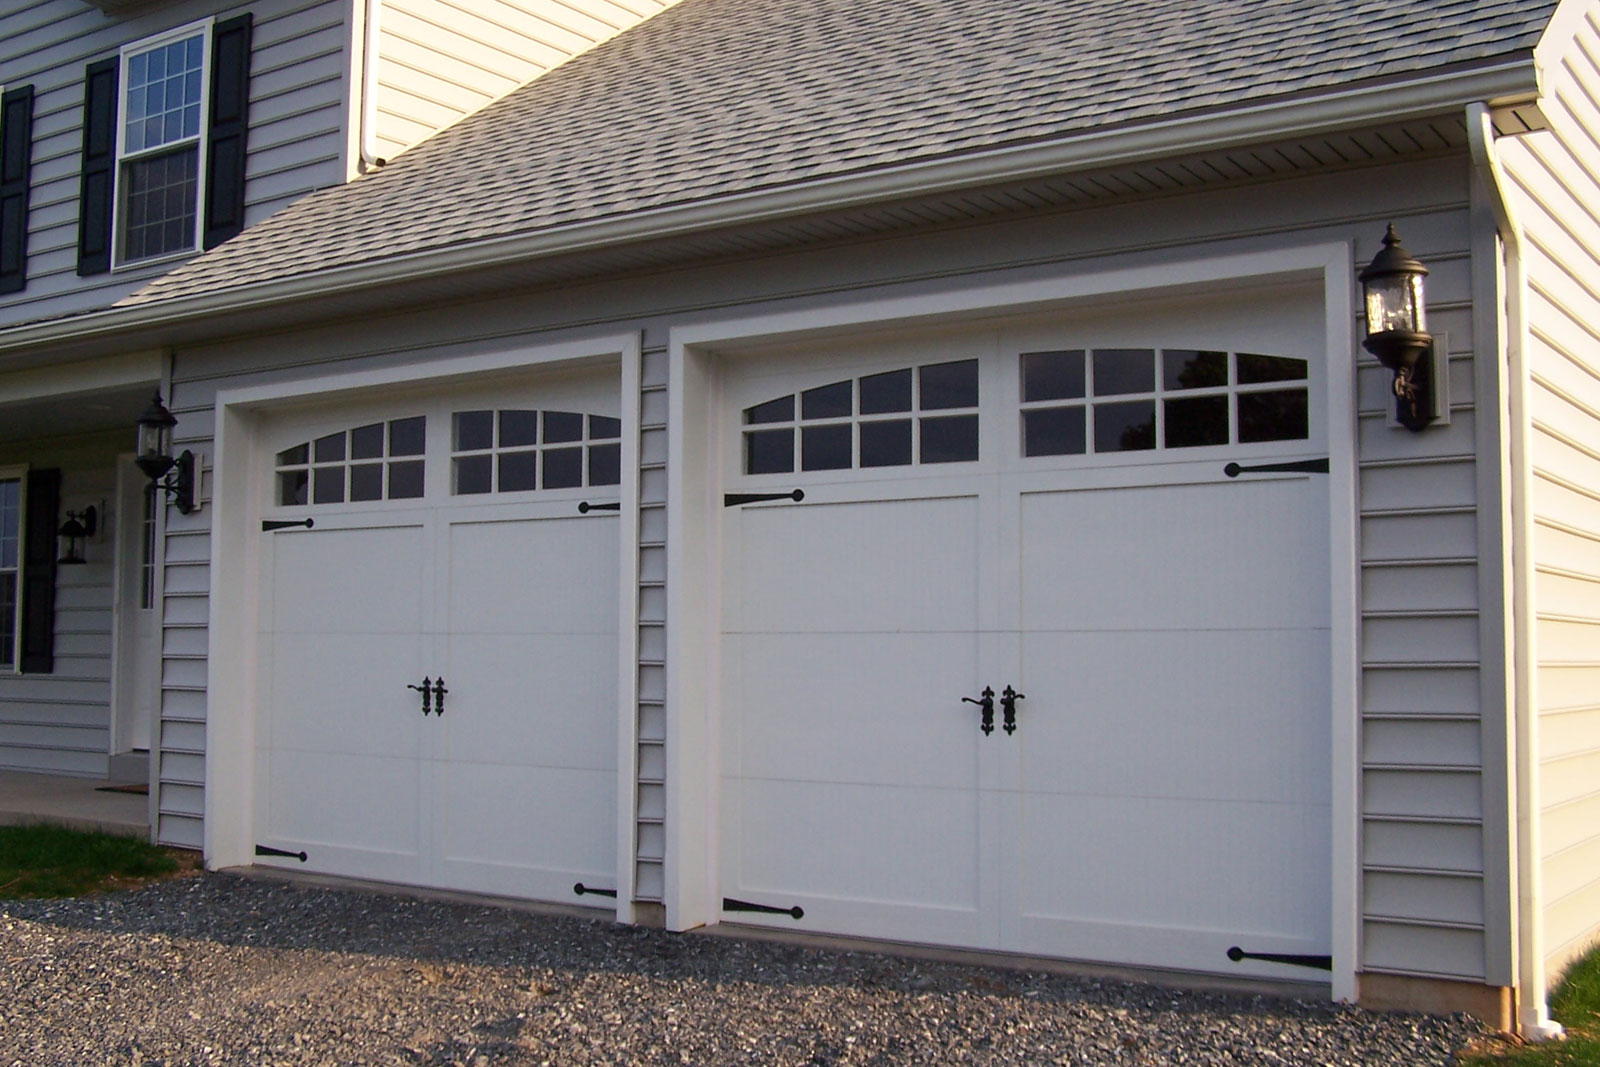 Standard Garage Using Small Standard Garage Door Sizes Using White Color Design Made From Wooden Material In Traditional Style Decoration Standard Garage Doors Sizes For Your Home Sweet Home